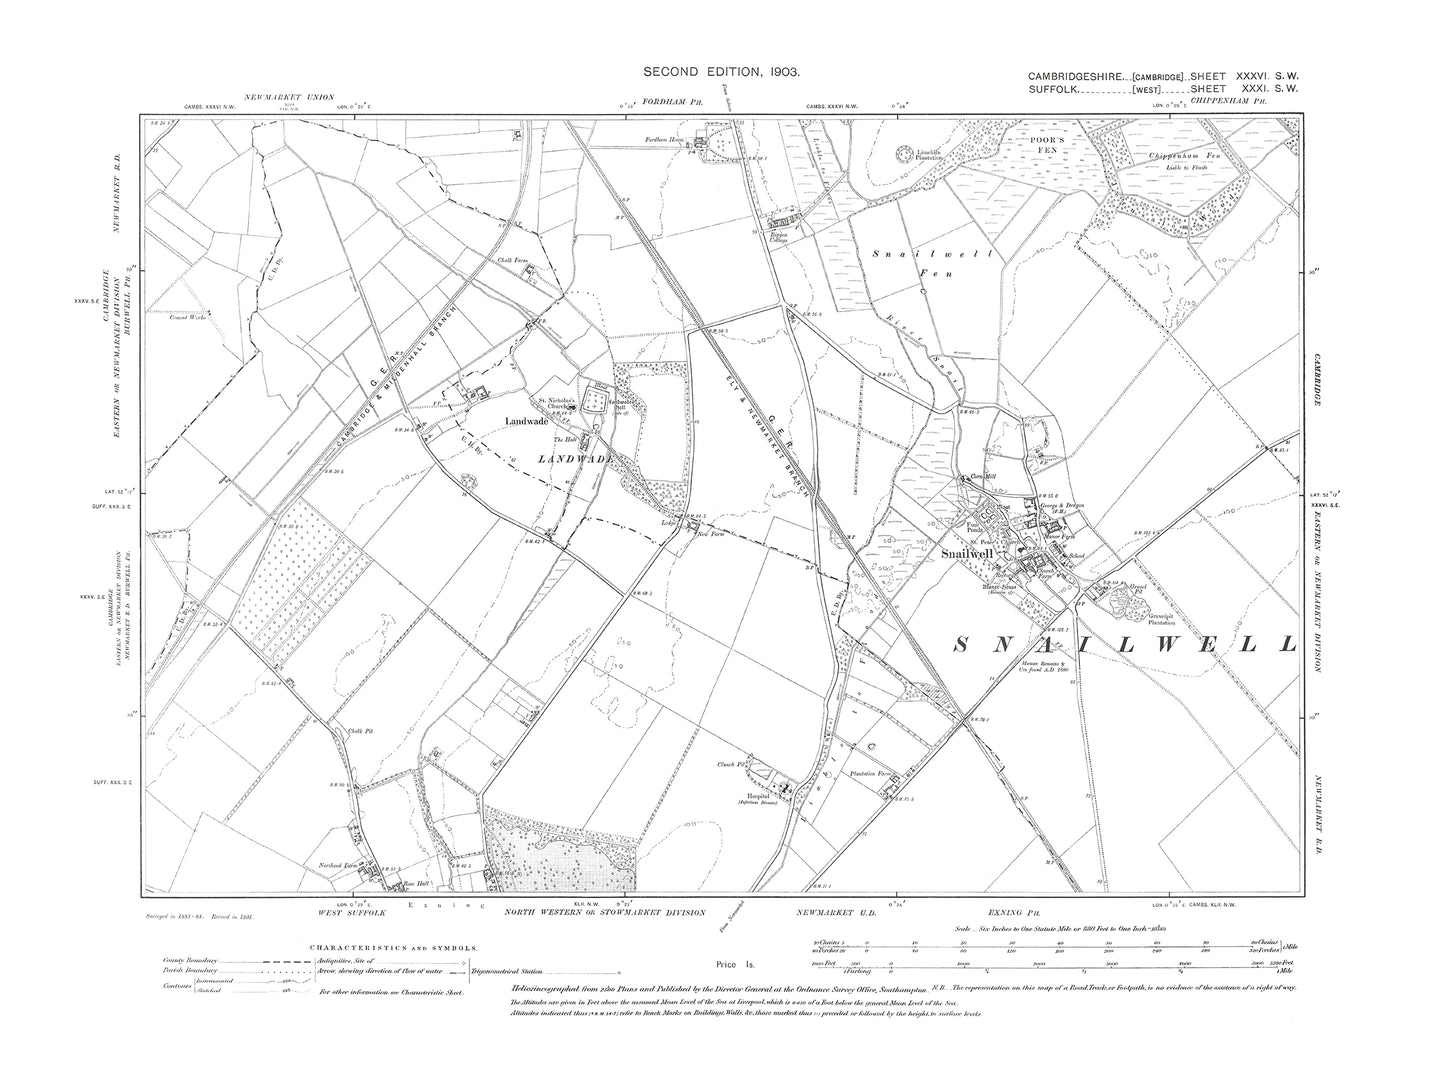 Old OS map dated 1903, showing Snailwell, Landwade in Cambridgeshire 36SW